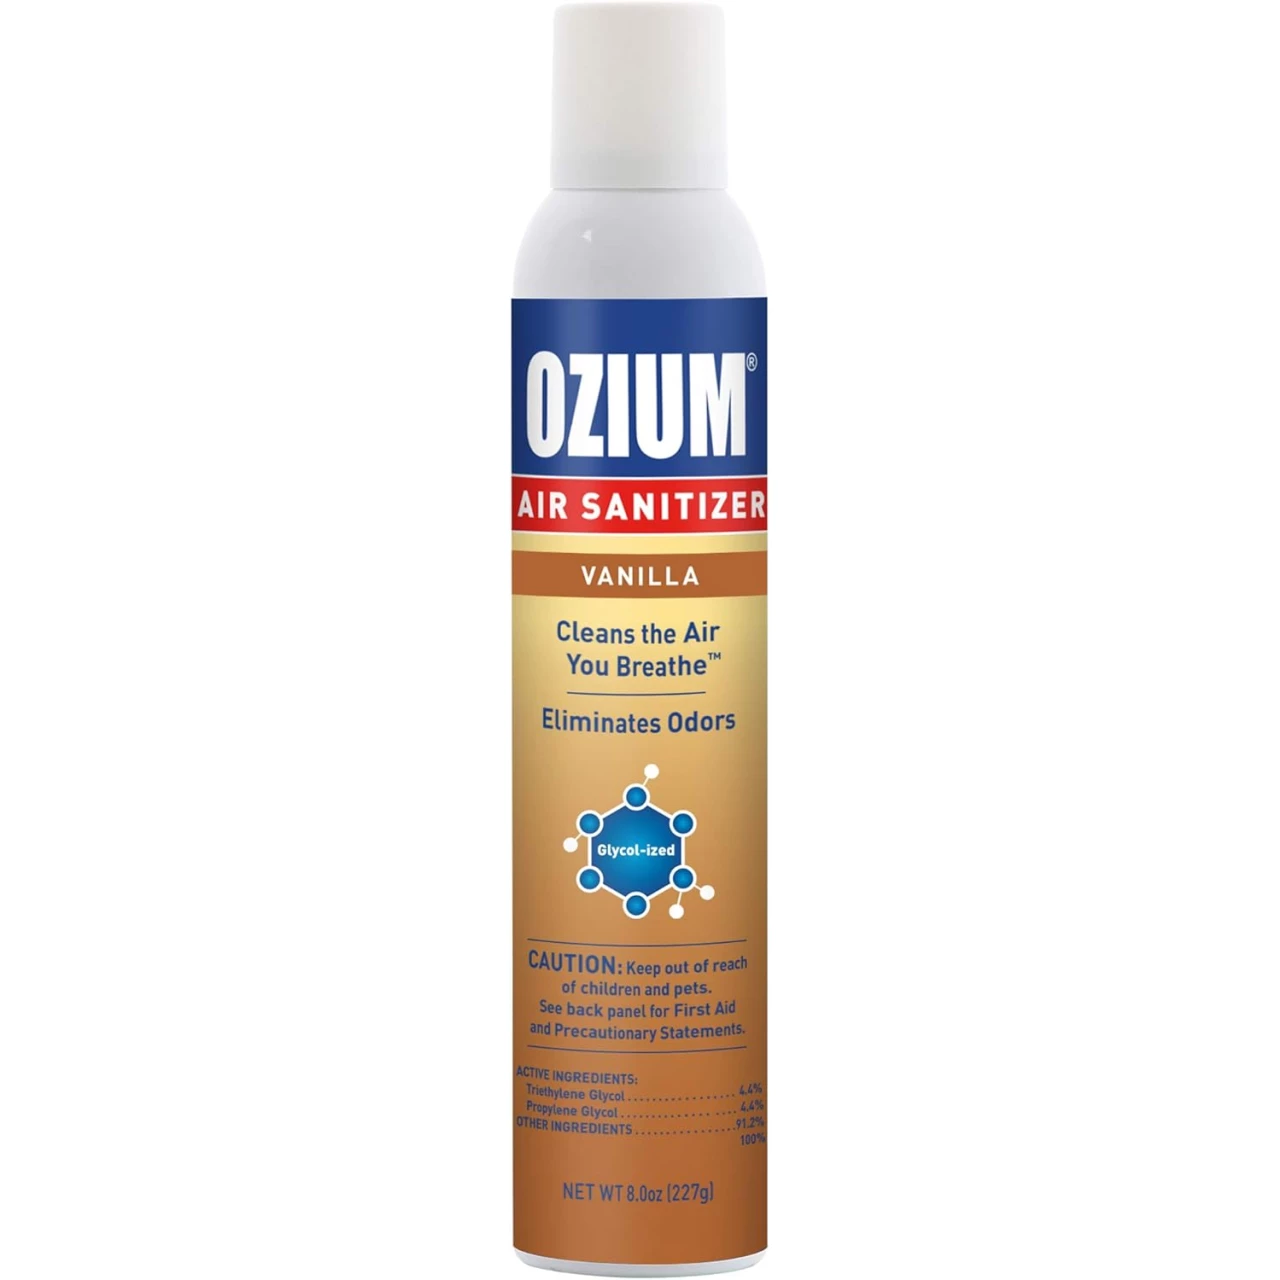 Ozium 8 Oz. Air Sanitizer &amp; Odor Eliminator 1 Pack for Homes, Cars, Offices and More, Vanilla